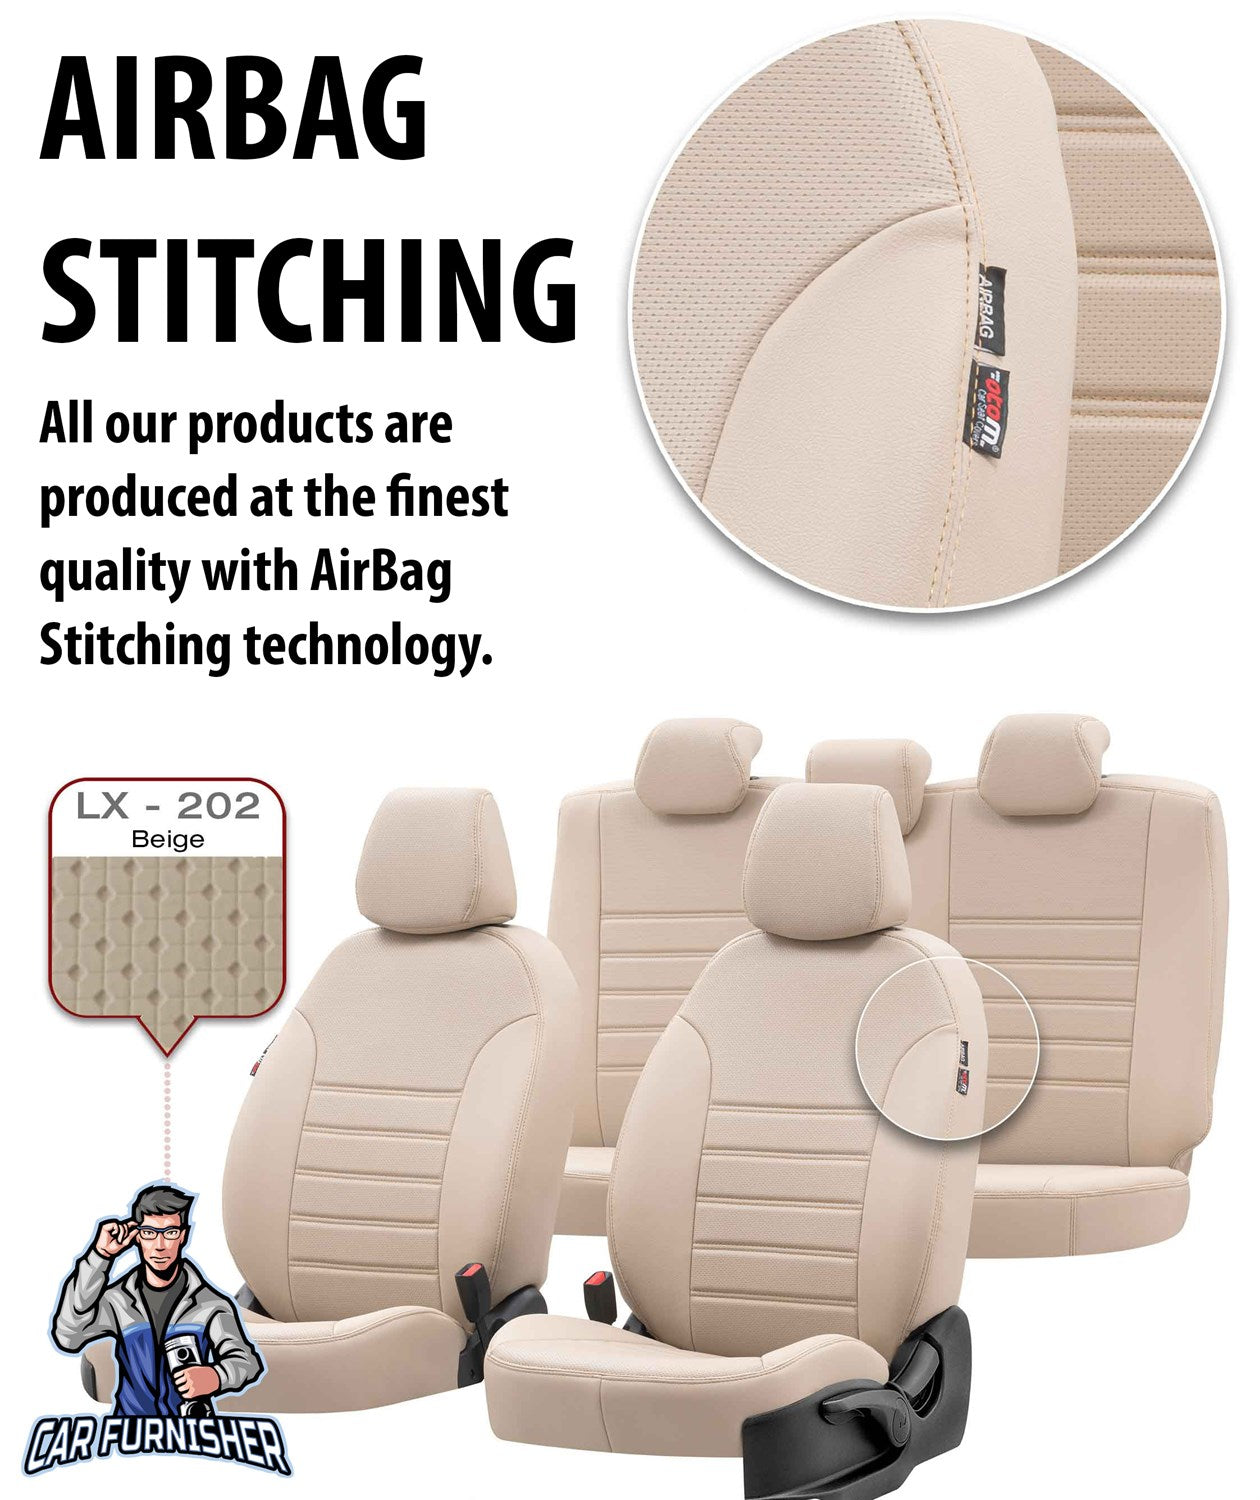 Citroen Jumpy Seat Covers New York Leather Design Ivory Leather